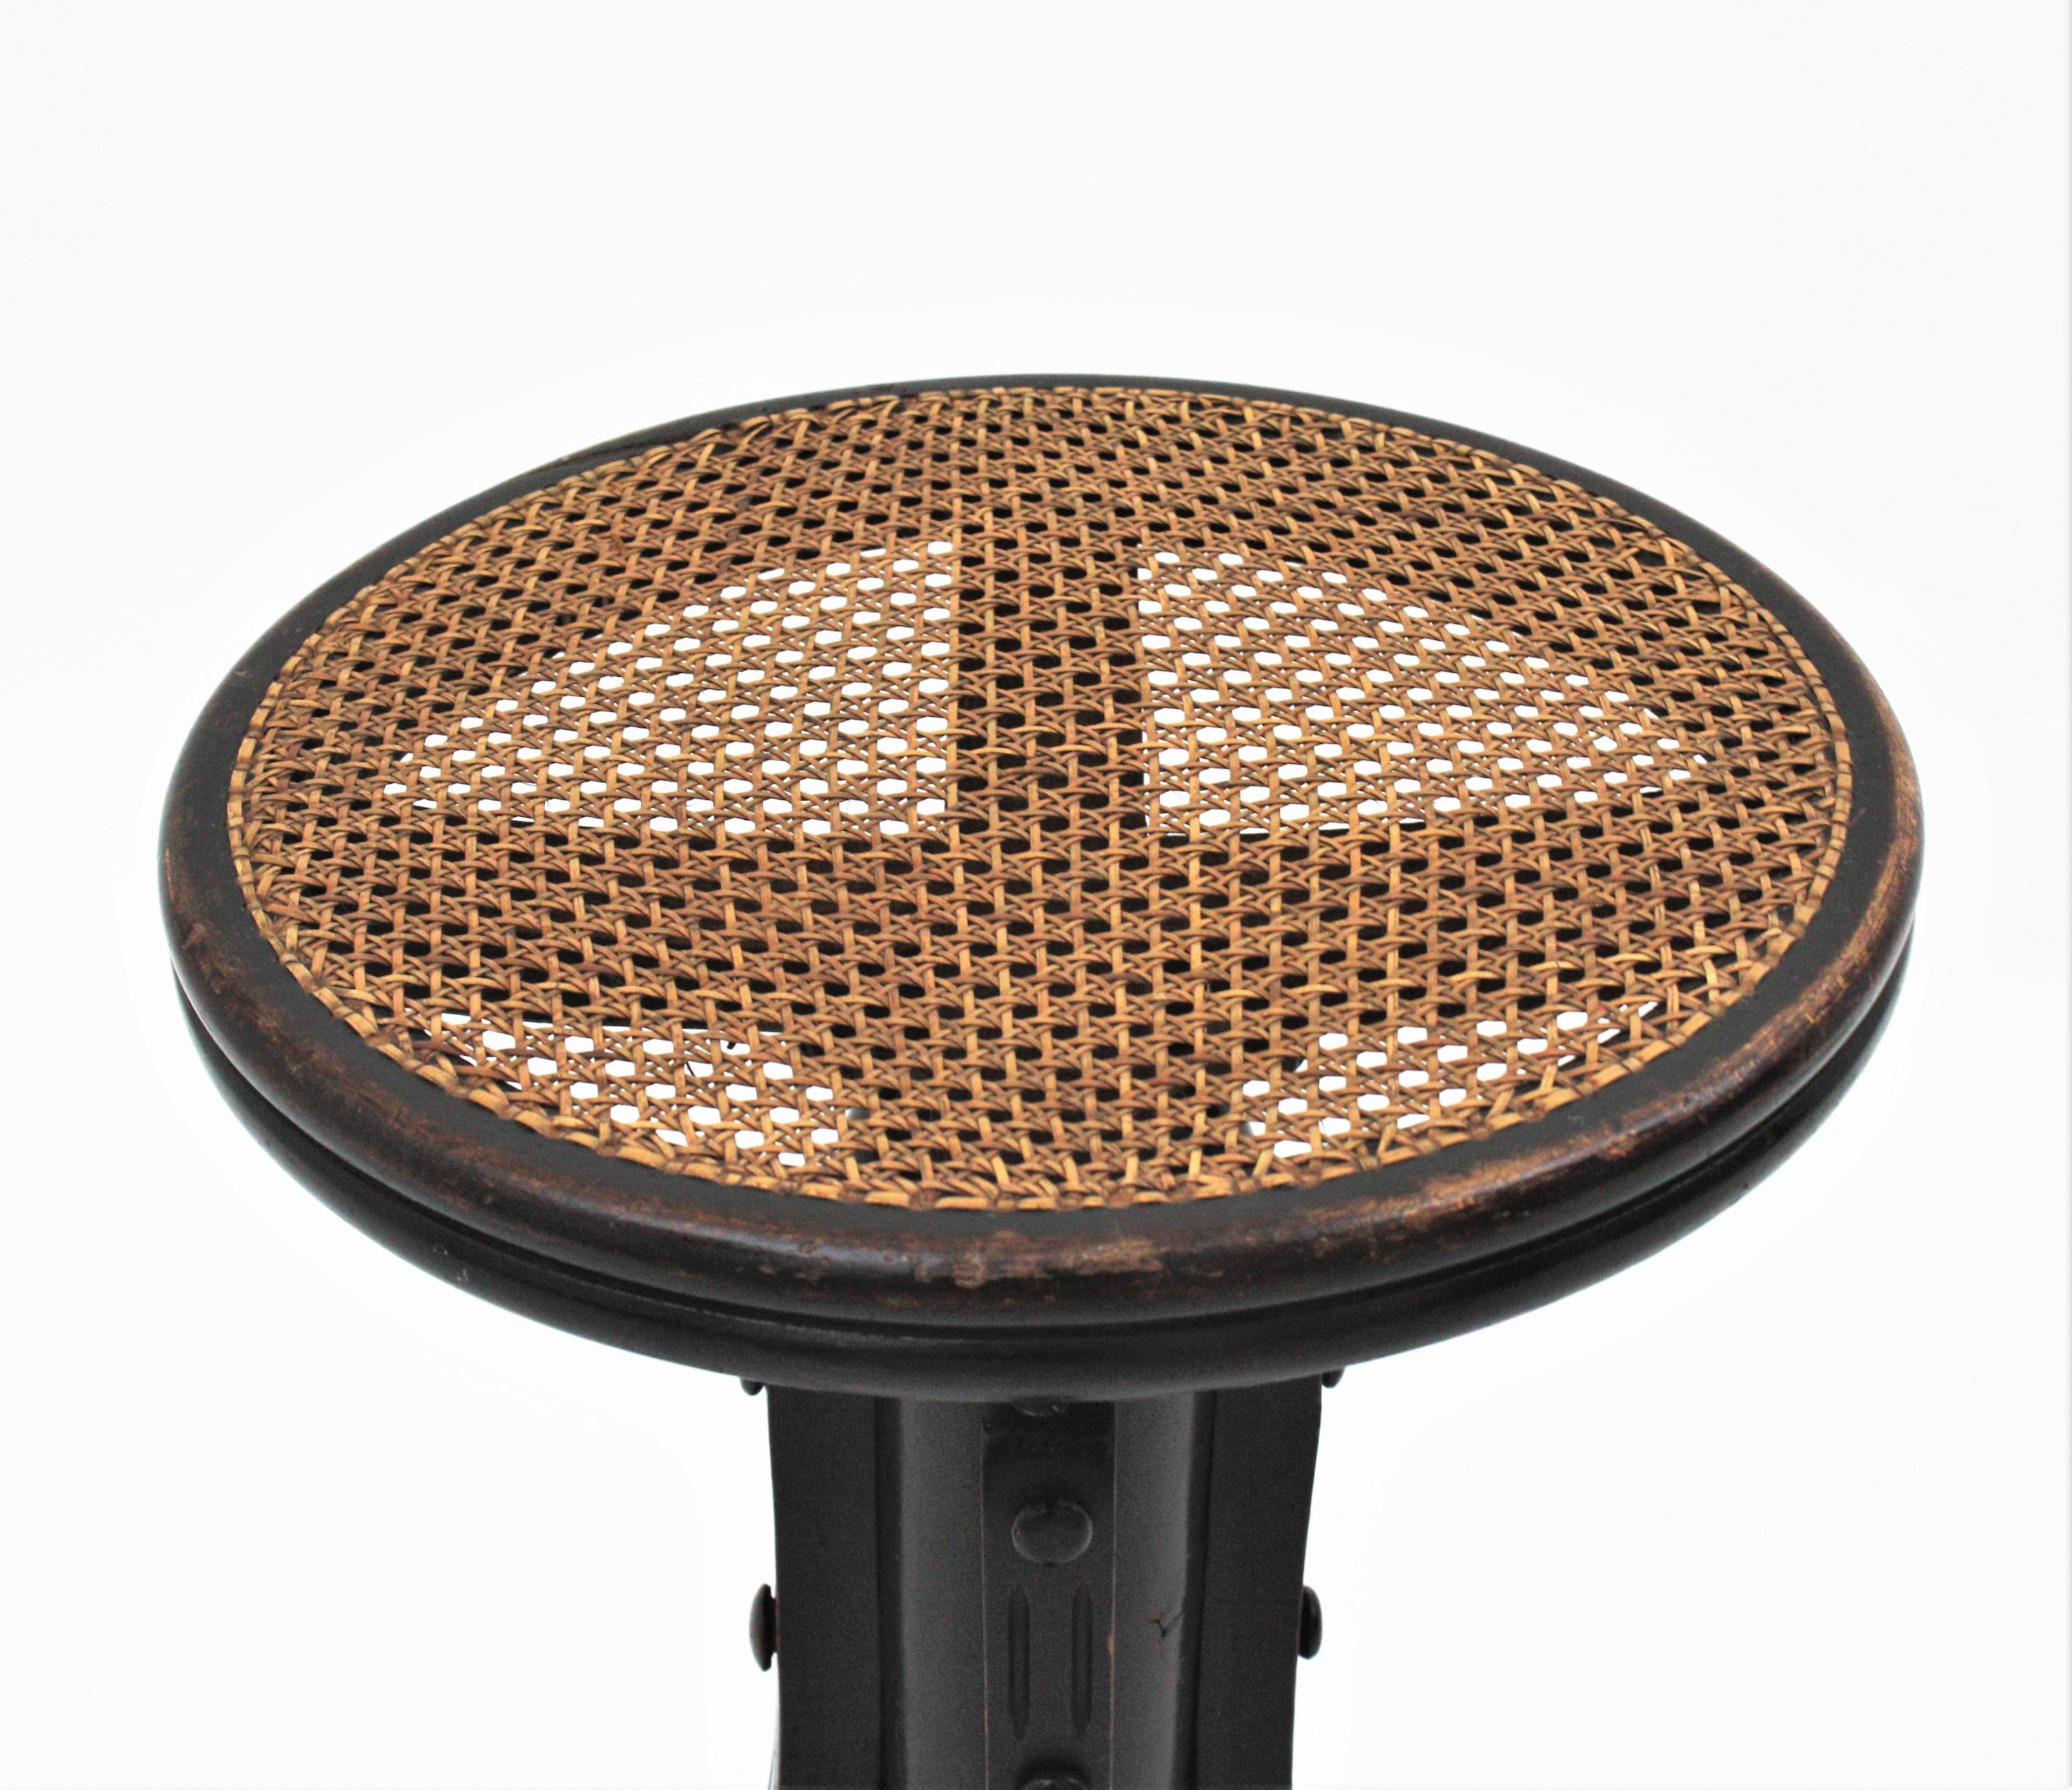 Woven Thonet Style Revolving Stool with Cane Seat For Sale